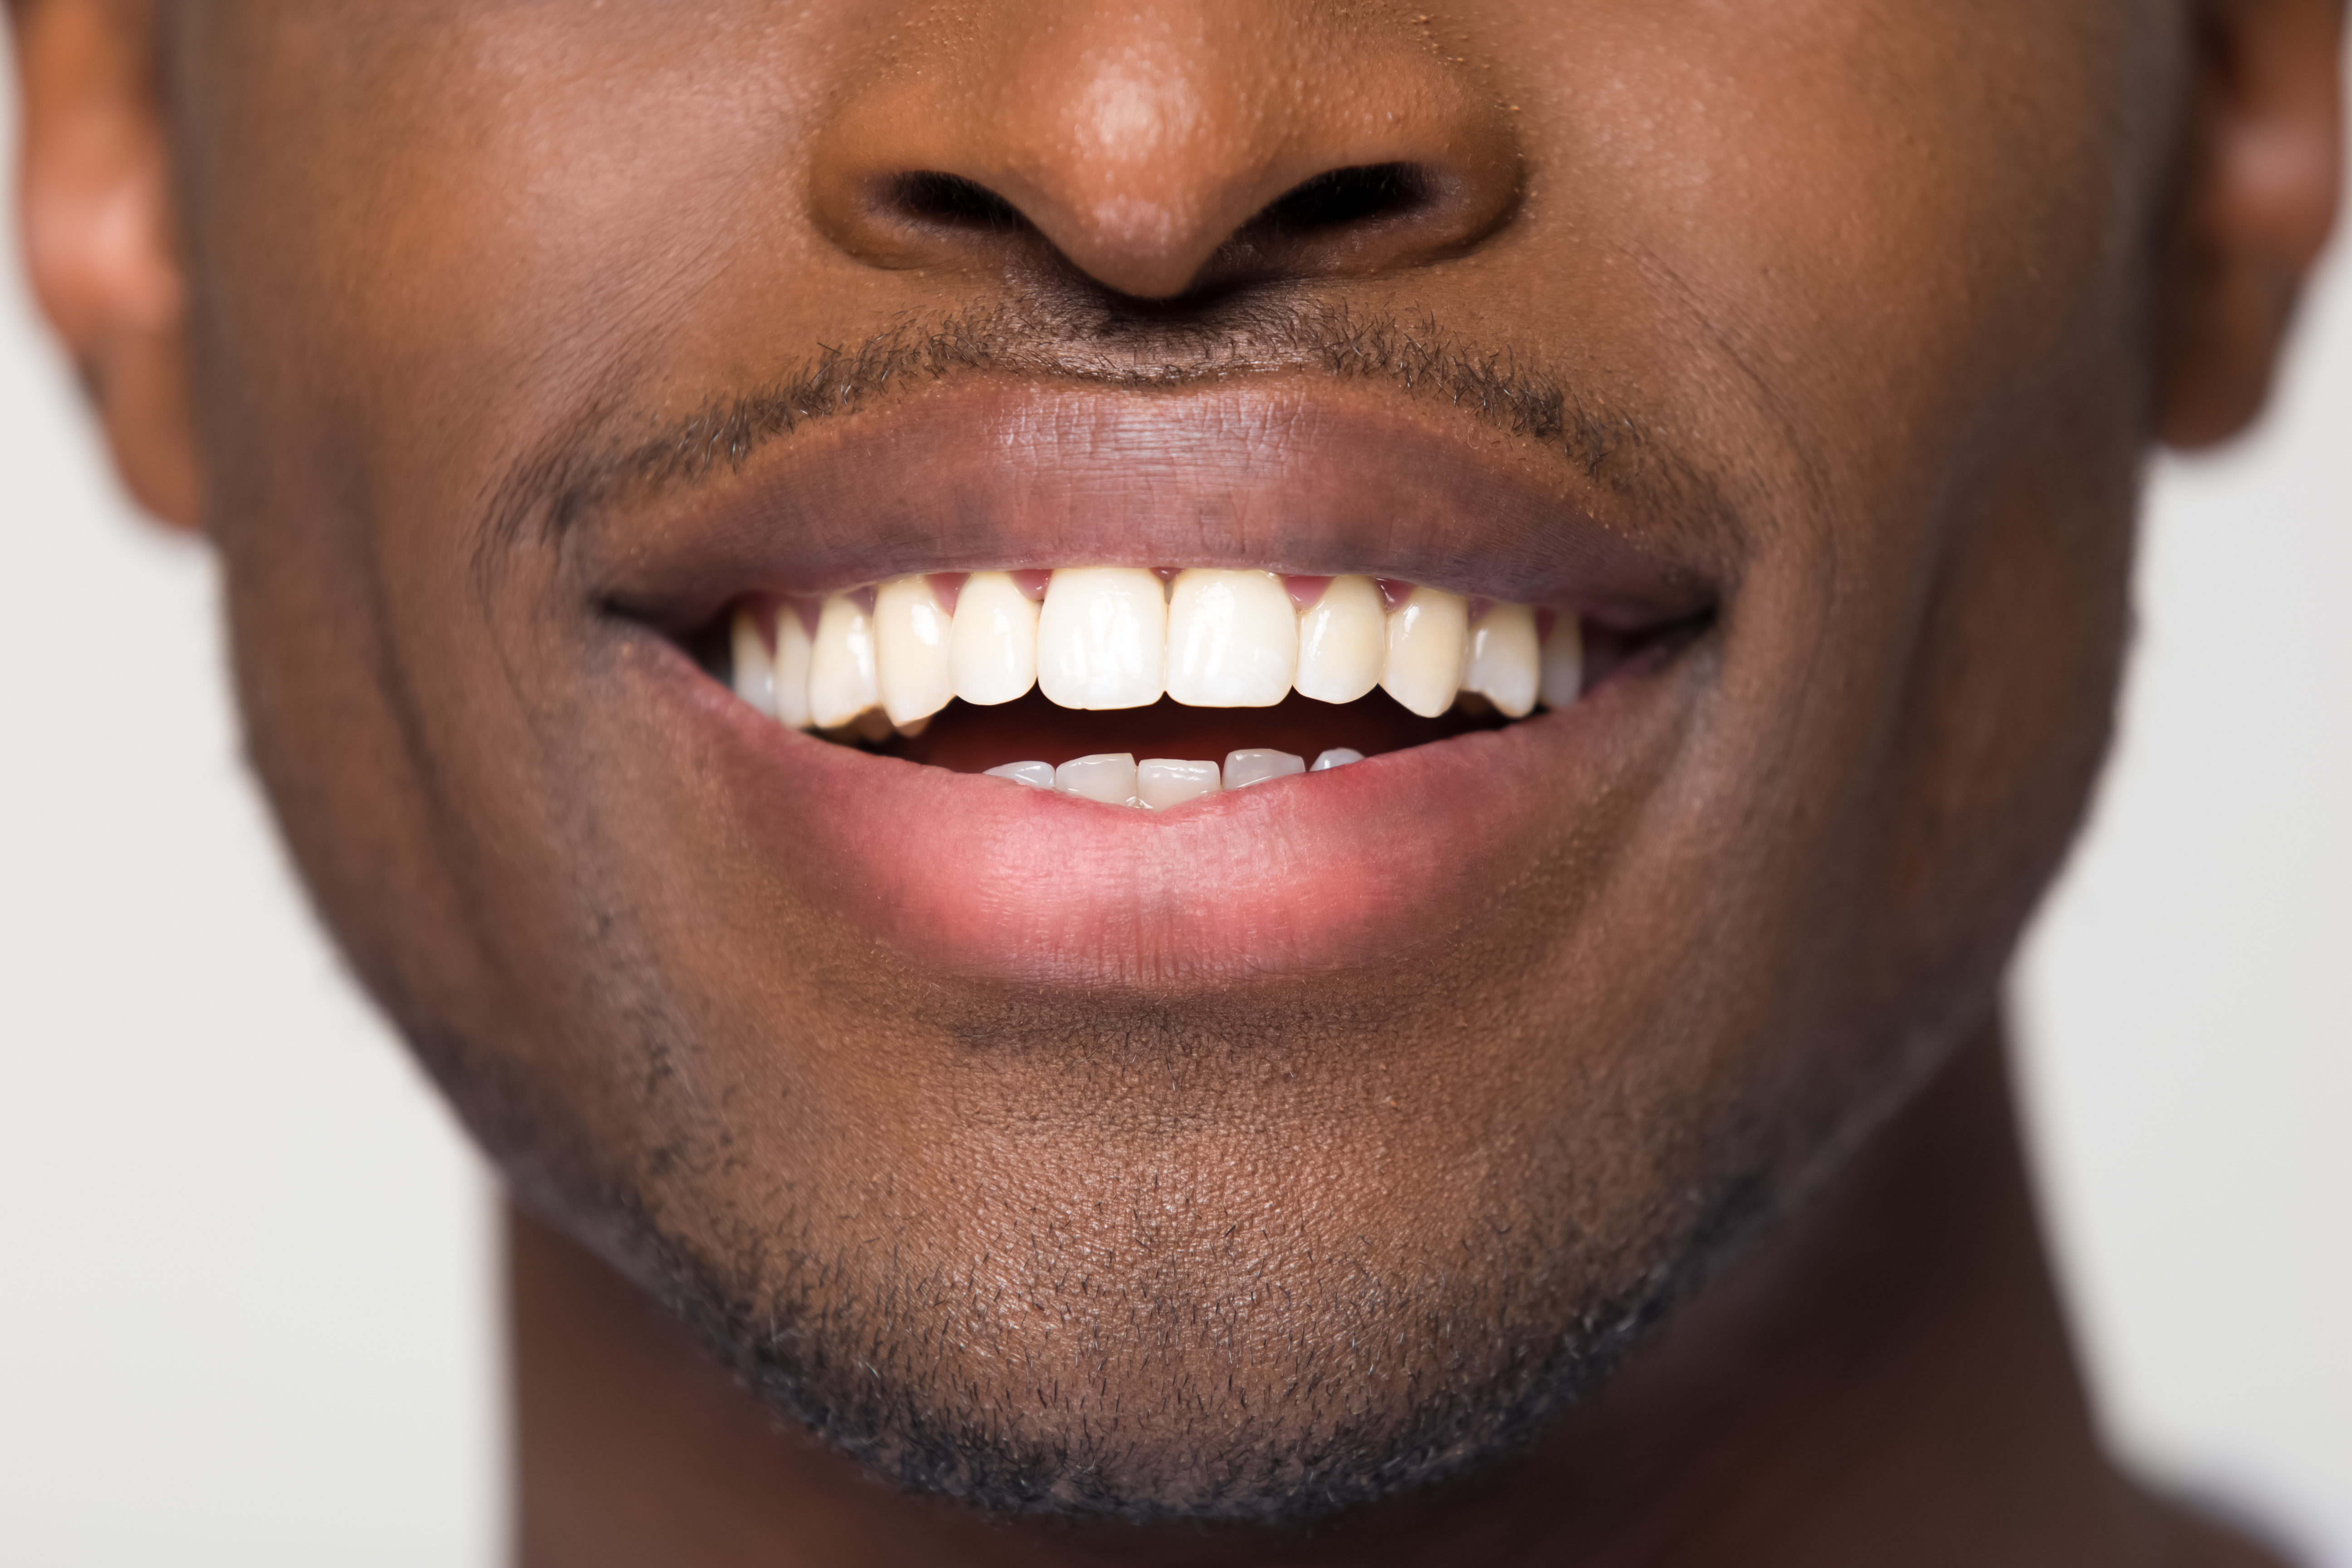 Close-up of smiling man’s mouth, showcasing his straight, white teeth after cosmetic dental treatment.